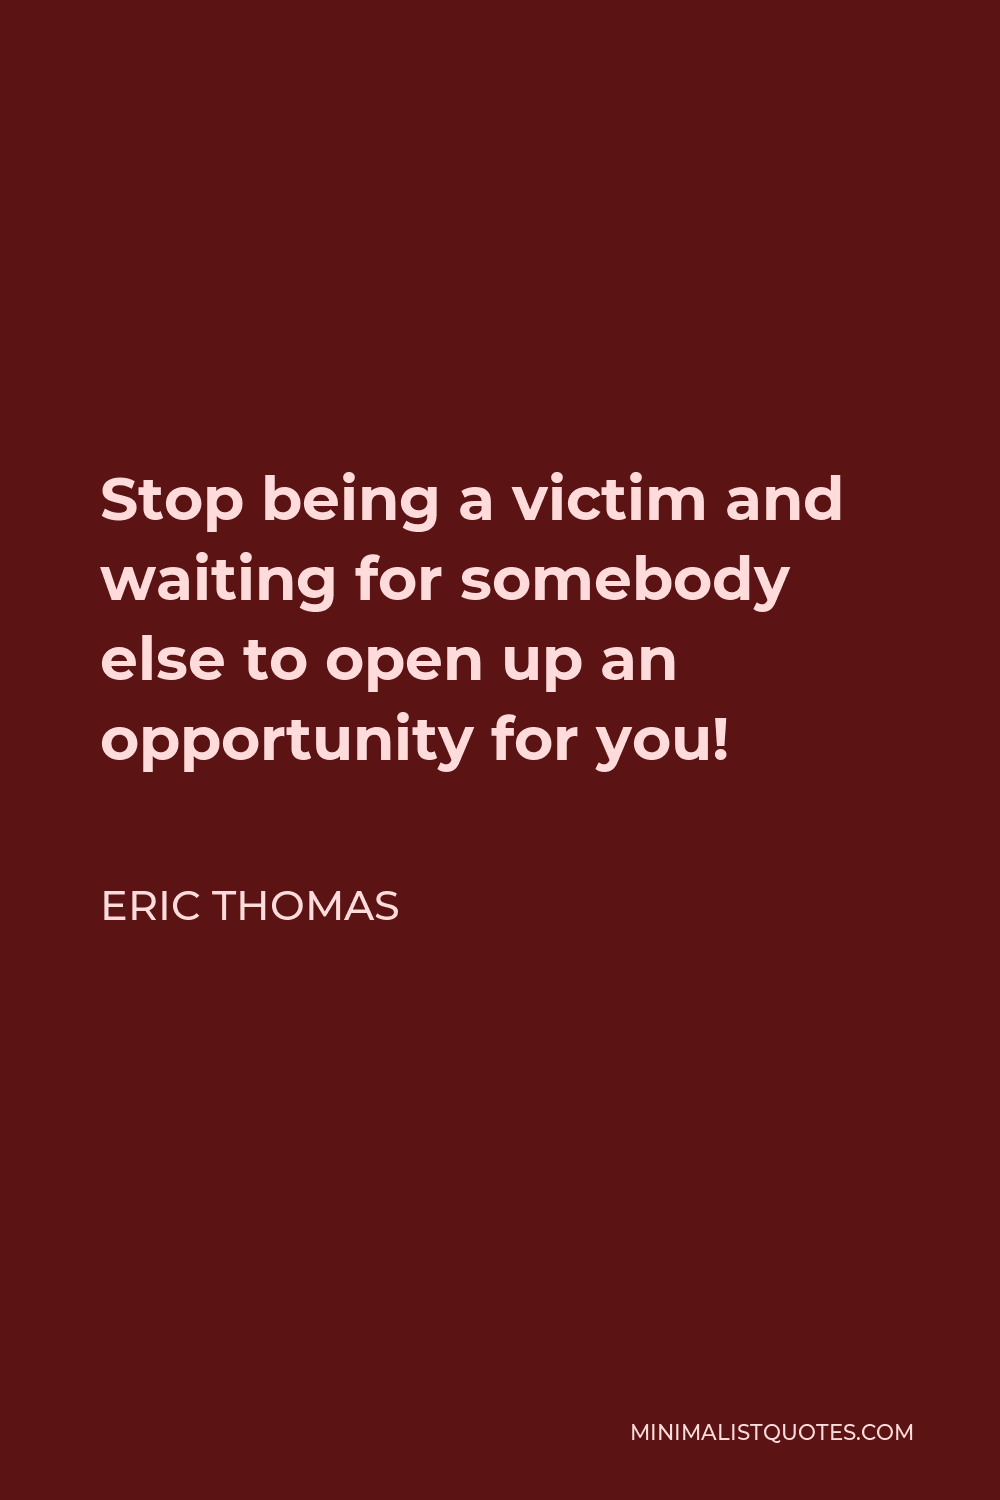 Eric Thomas Quote - Stop being a victim and waiting for somebody else to open up an opportunity for you!